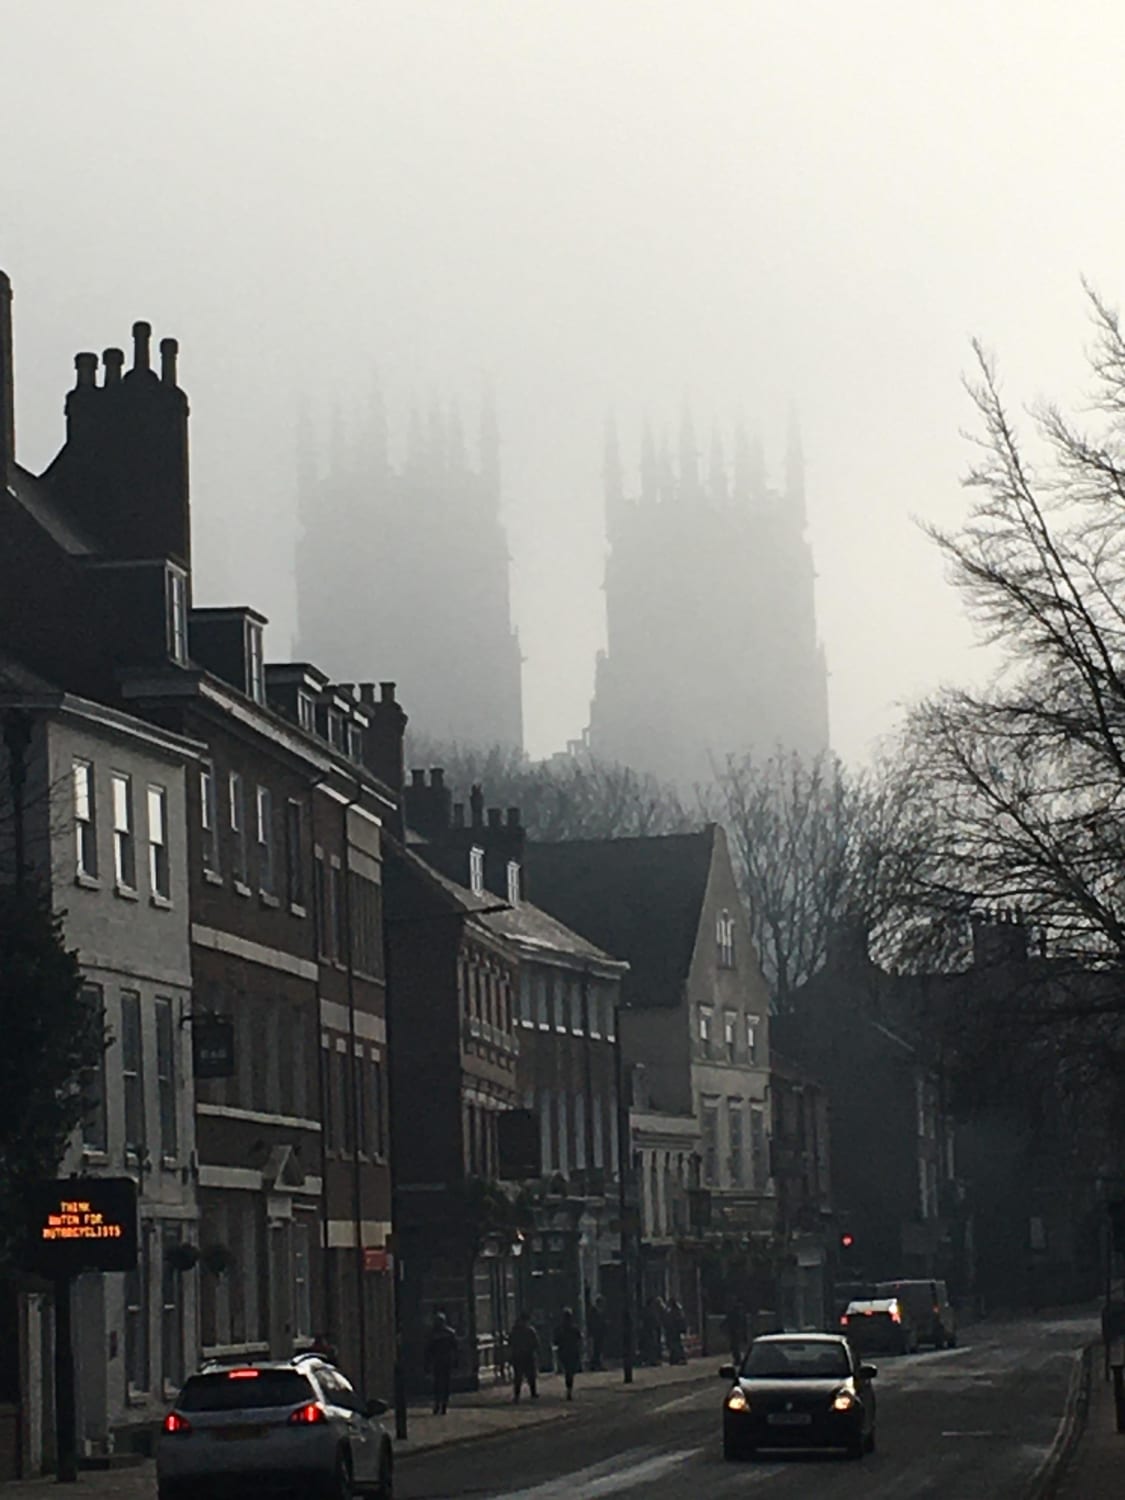 Took this of the York Minster a while ago while on the way to Church. Definitely looks straight from LOTR!